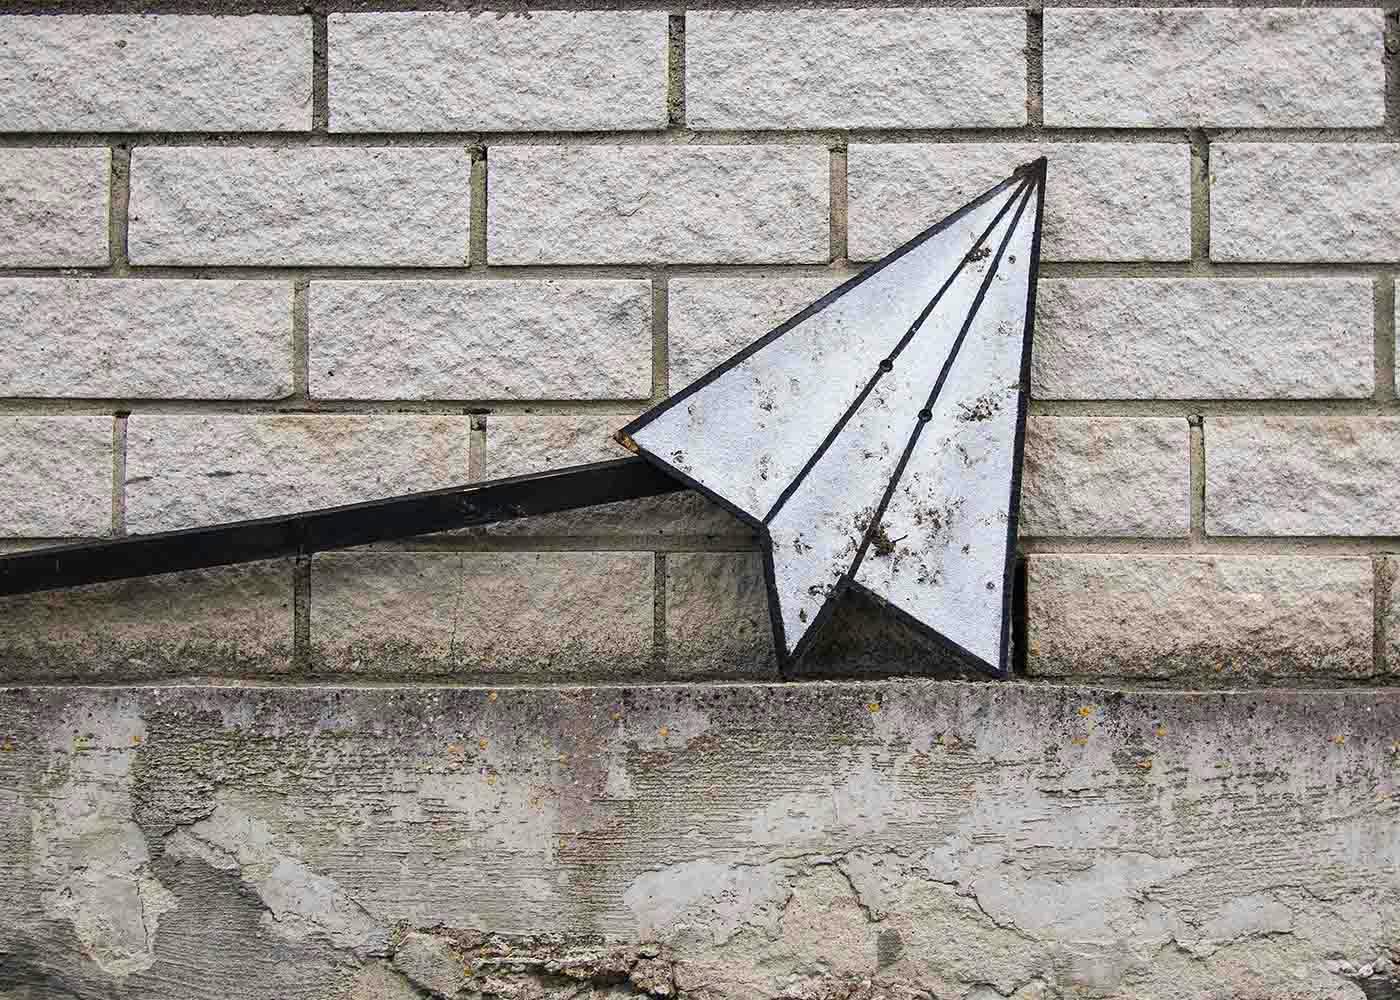 A mail airplane leaning against a brick wall